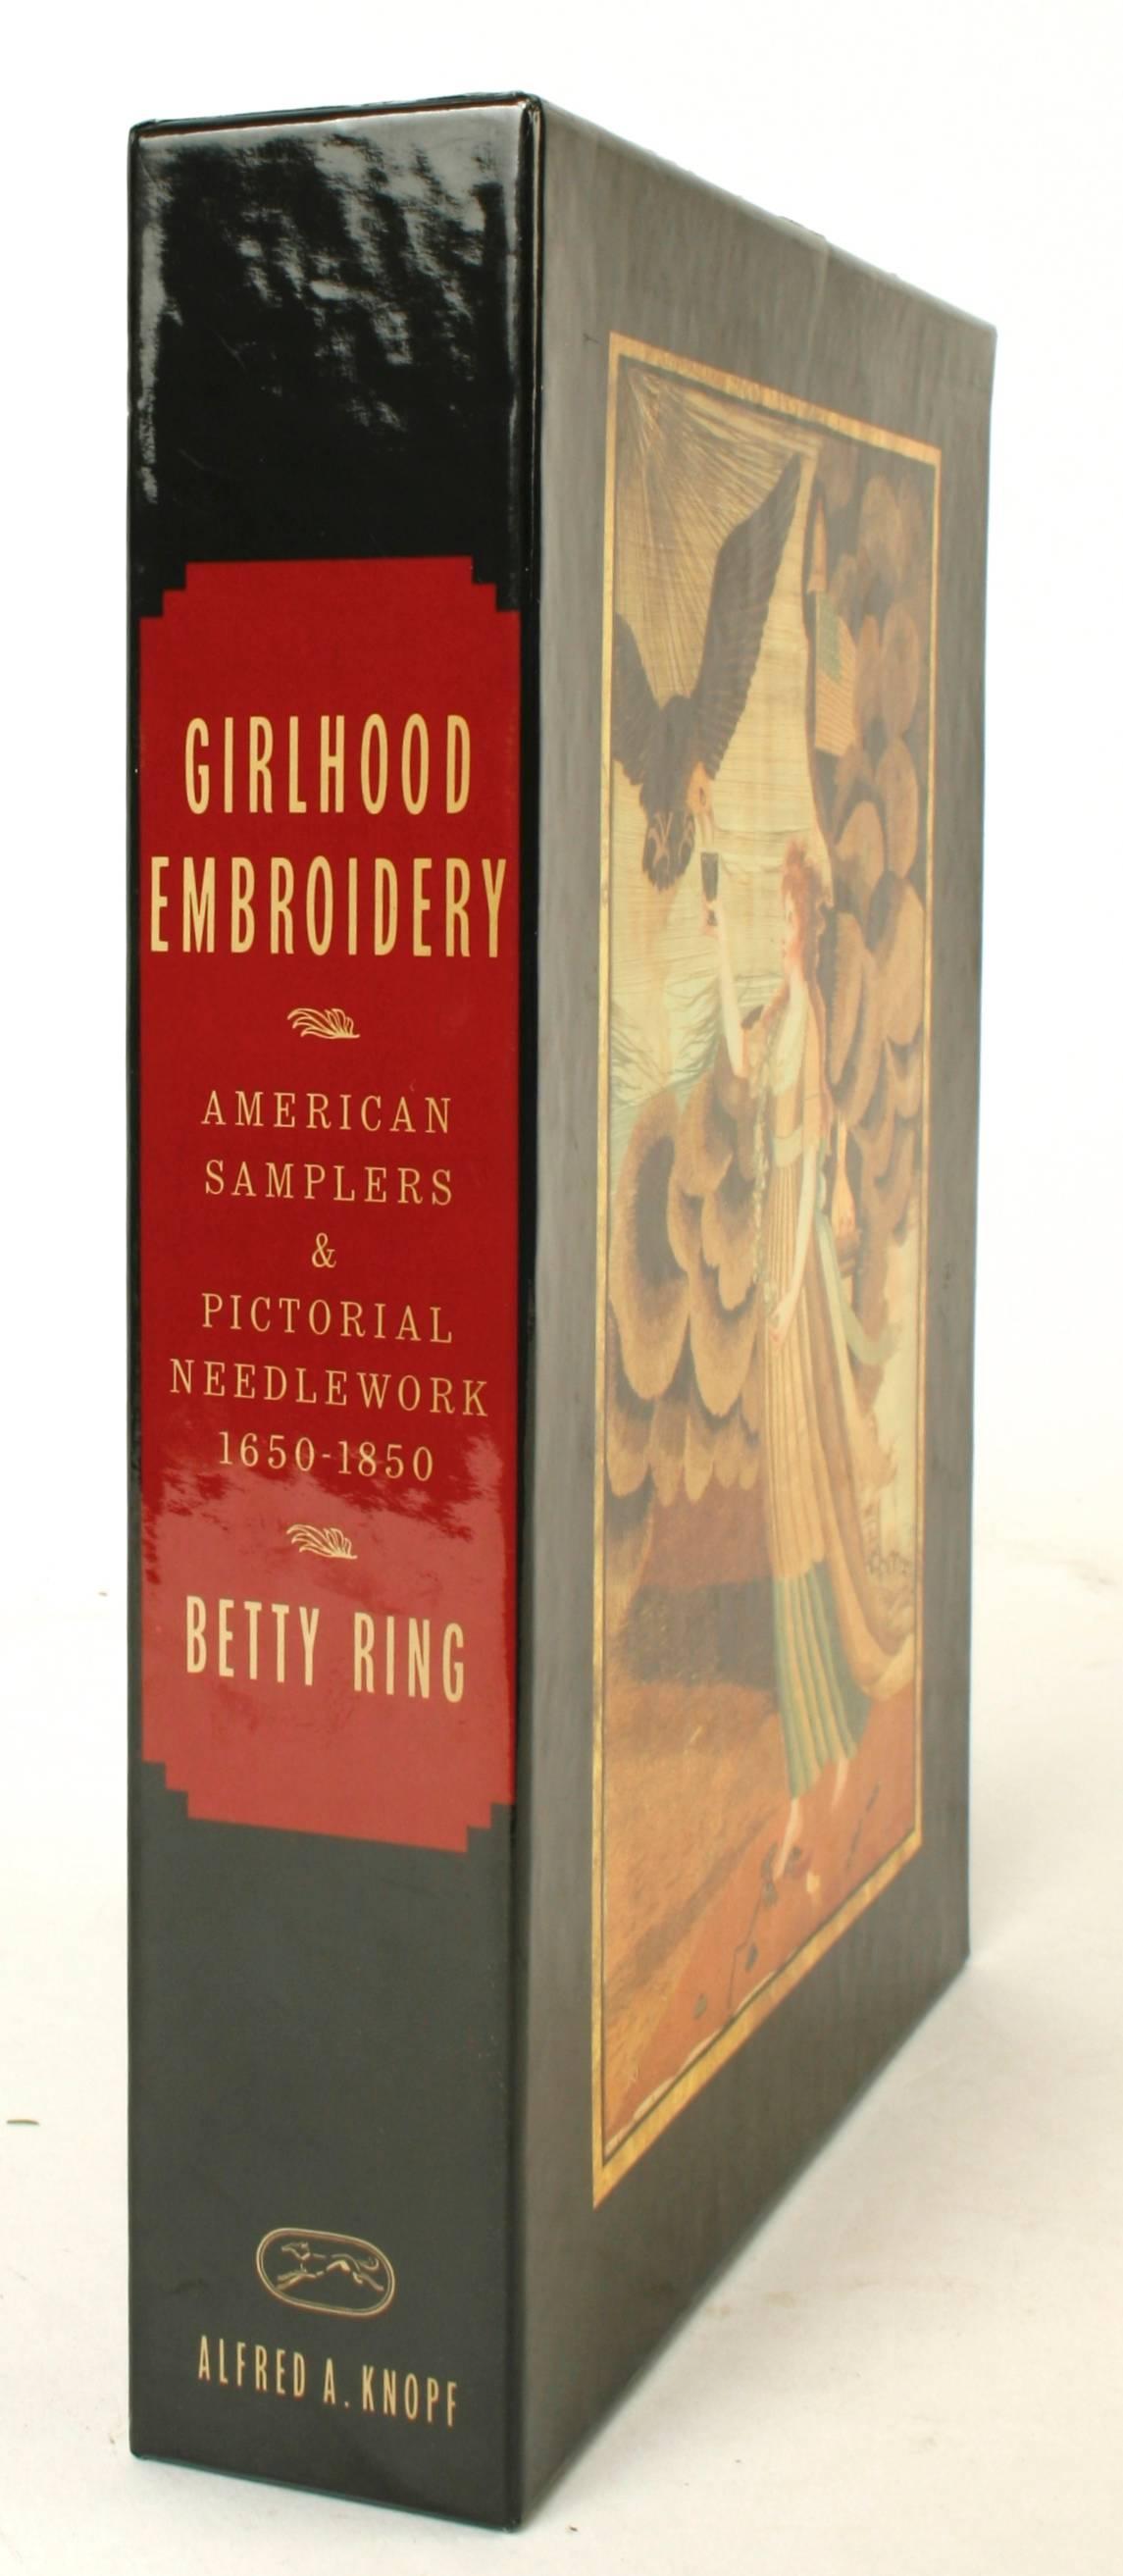 Girlhood embroidery, American samplers and pictorial needlework 1650-1850 by Betty Ring. New York: Alfred A. Knopf, Inc., 1993. Stated first edition in two volumes hardcovers with slip case. 583 pp. A beautiful collector's edition by the leading